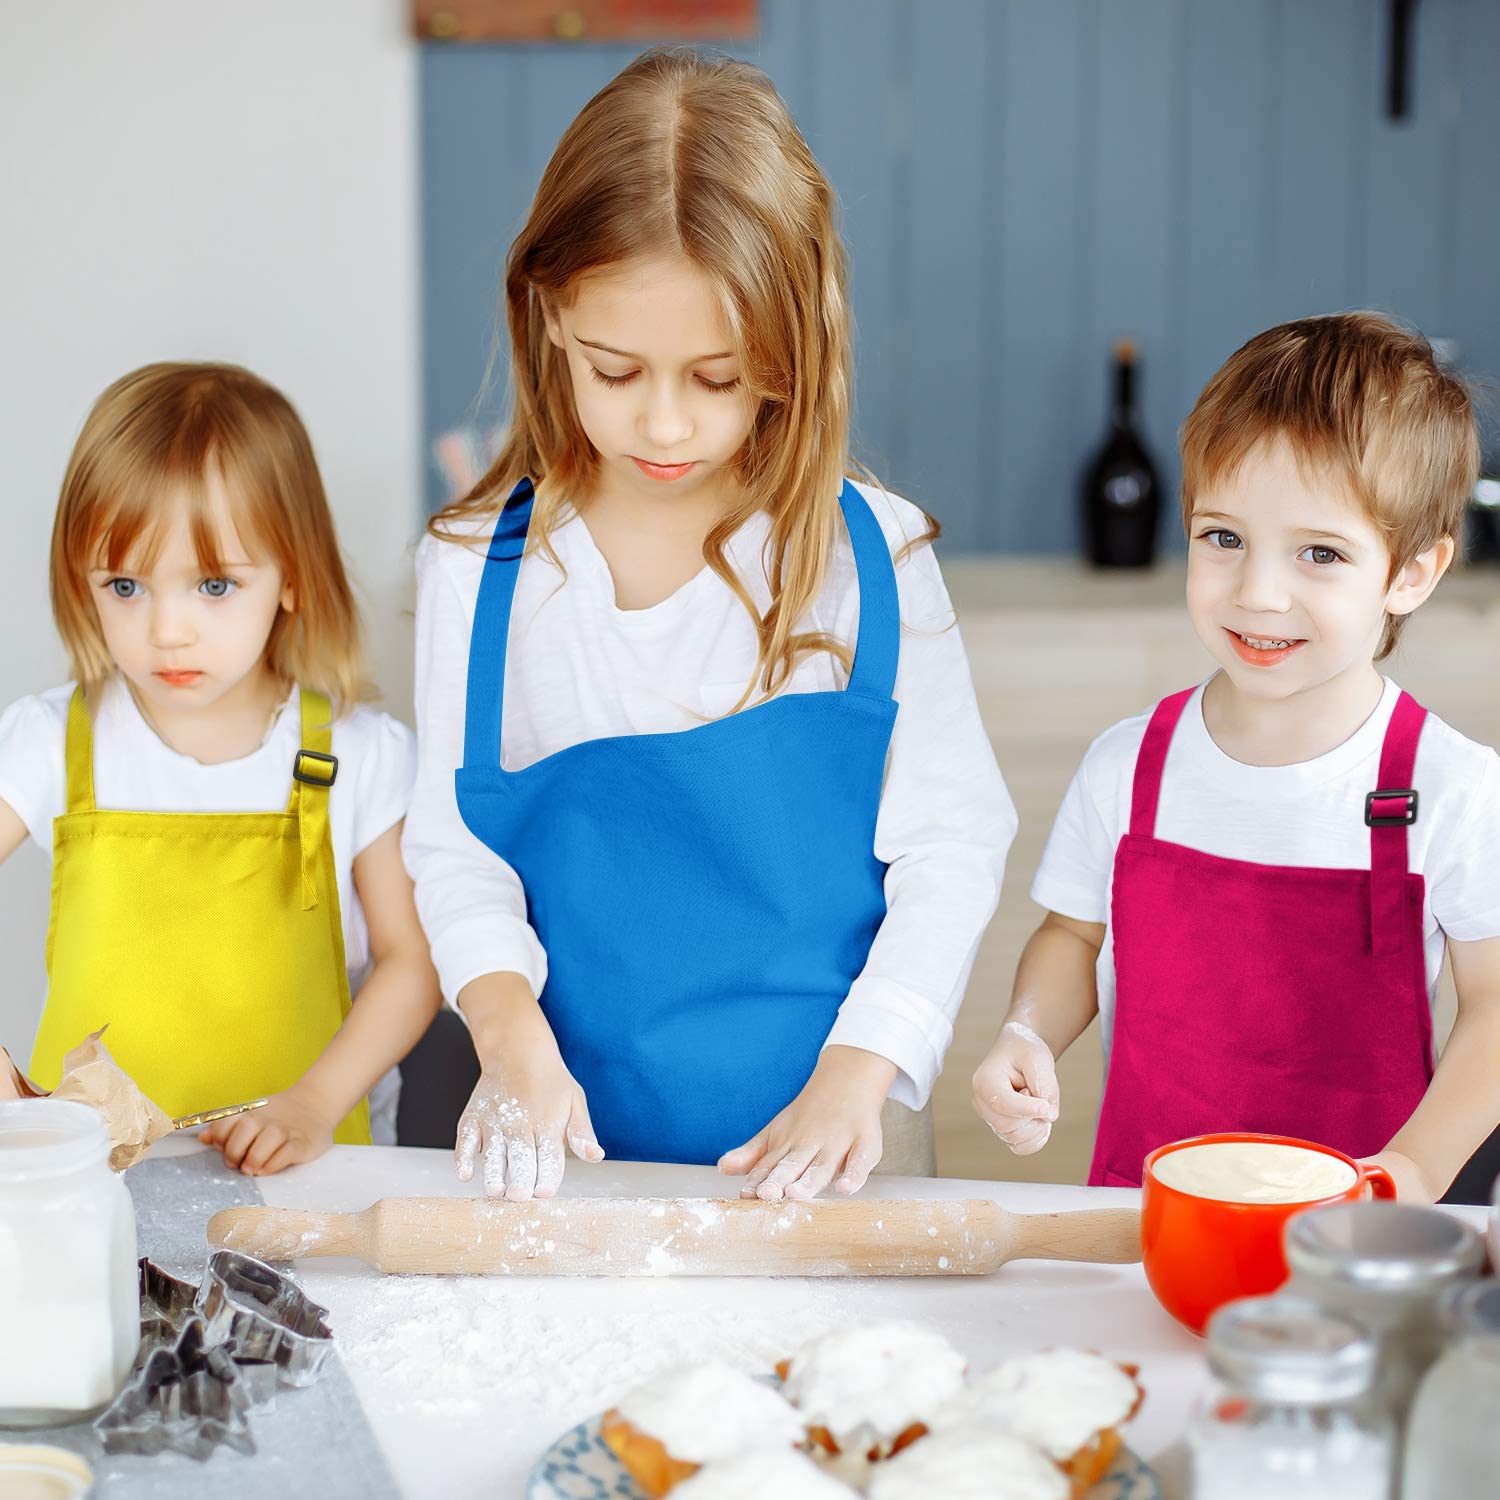 Get Kids Aprons to Help Prevent Mess on Their Clothes